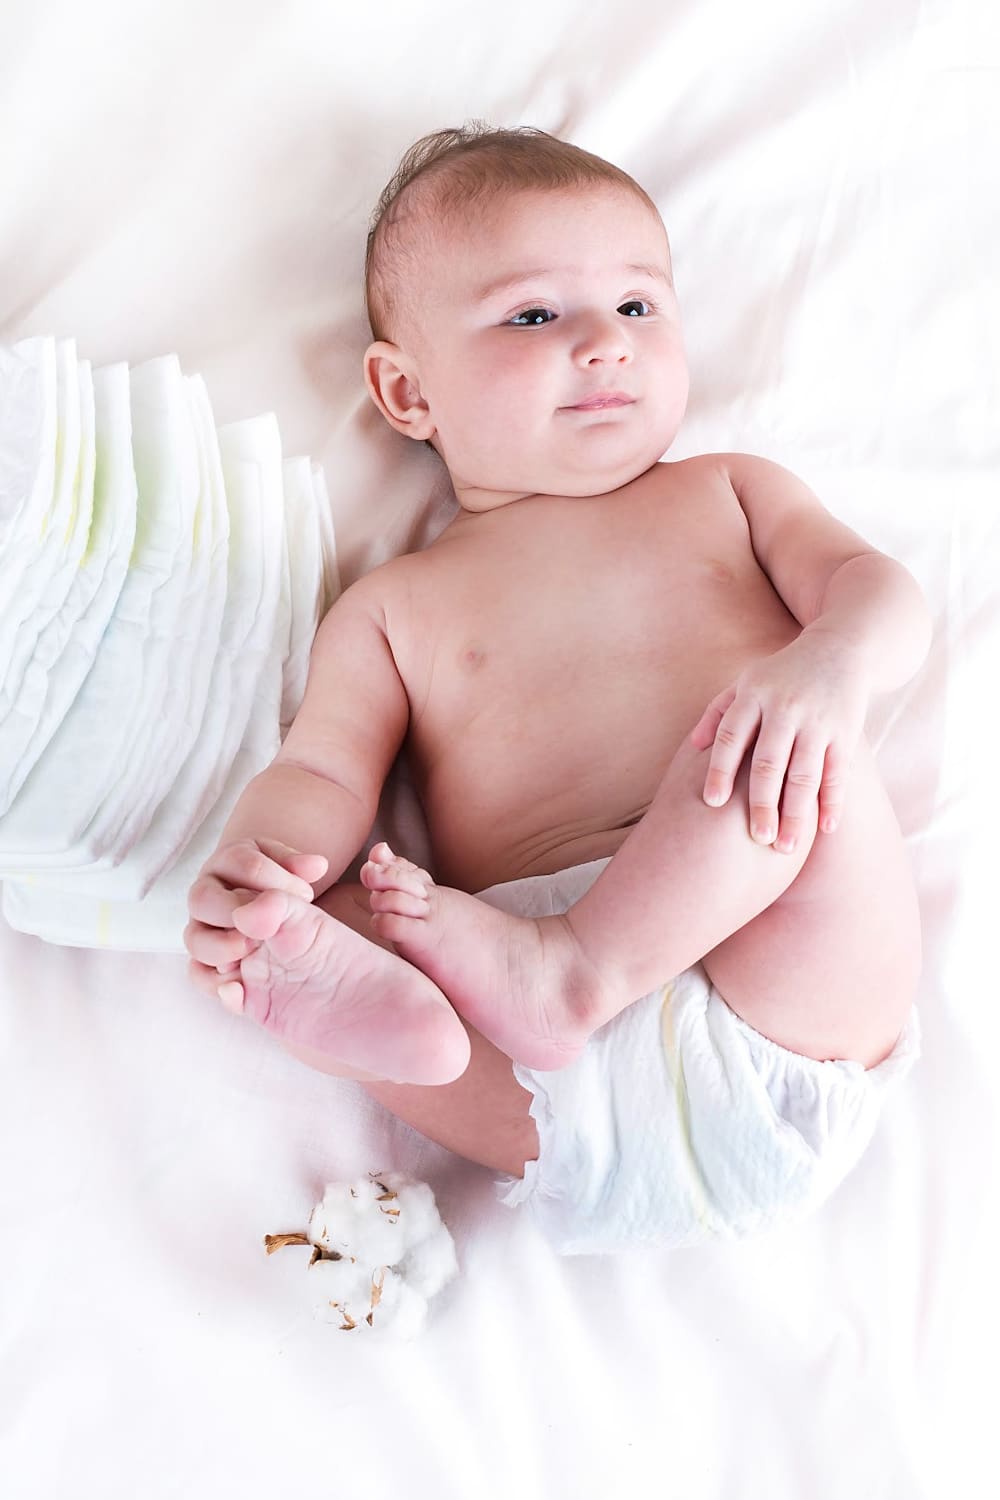 diapers for your baby featured image